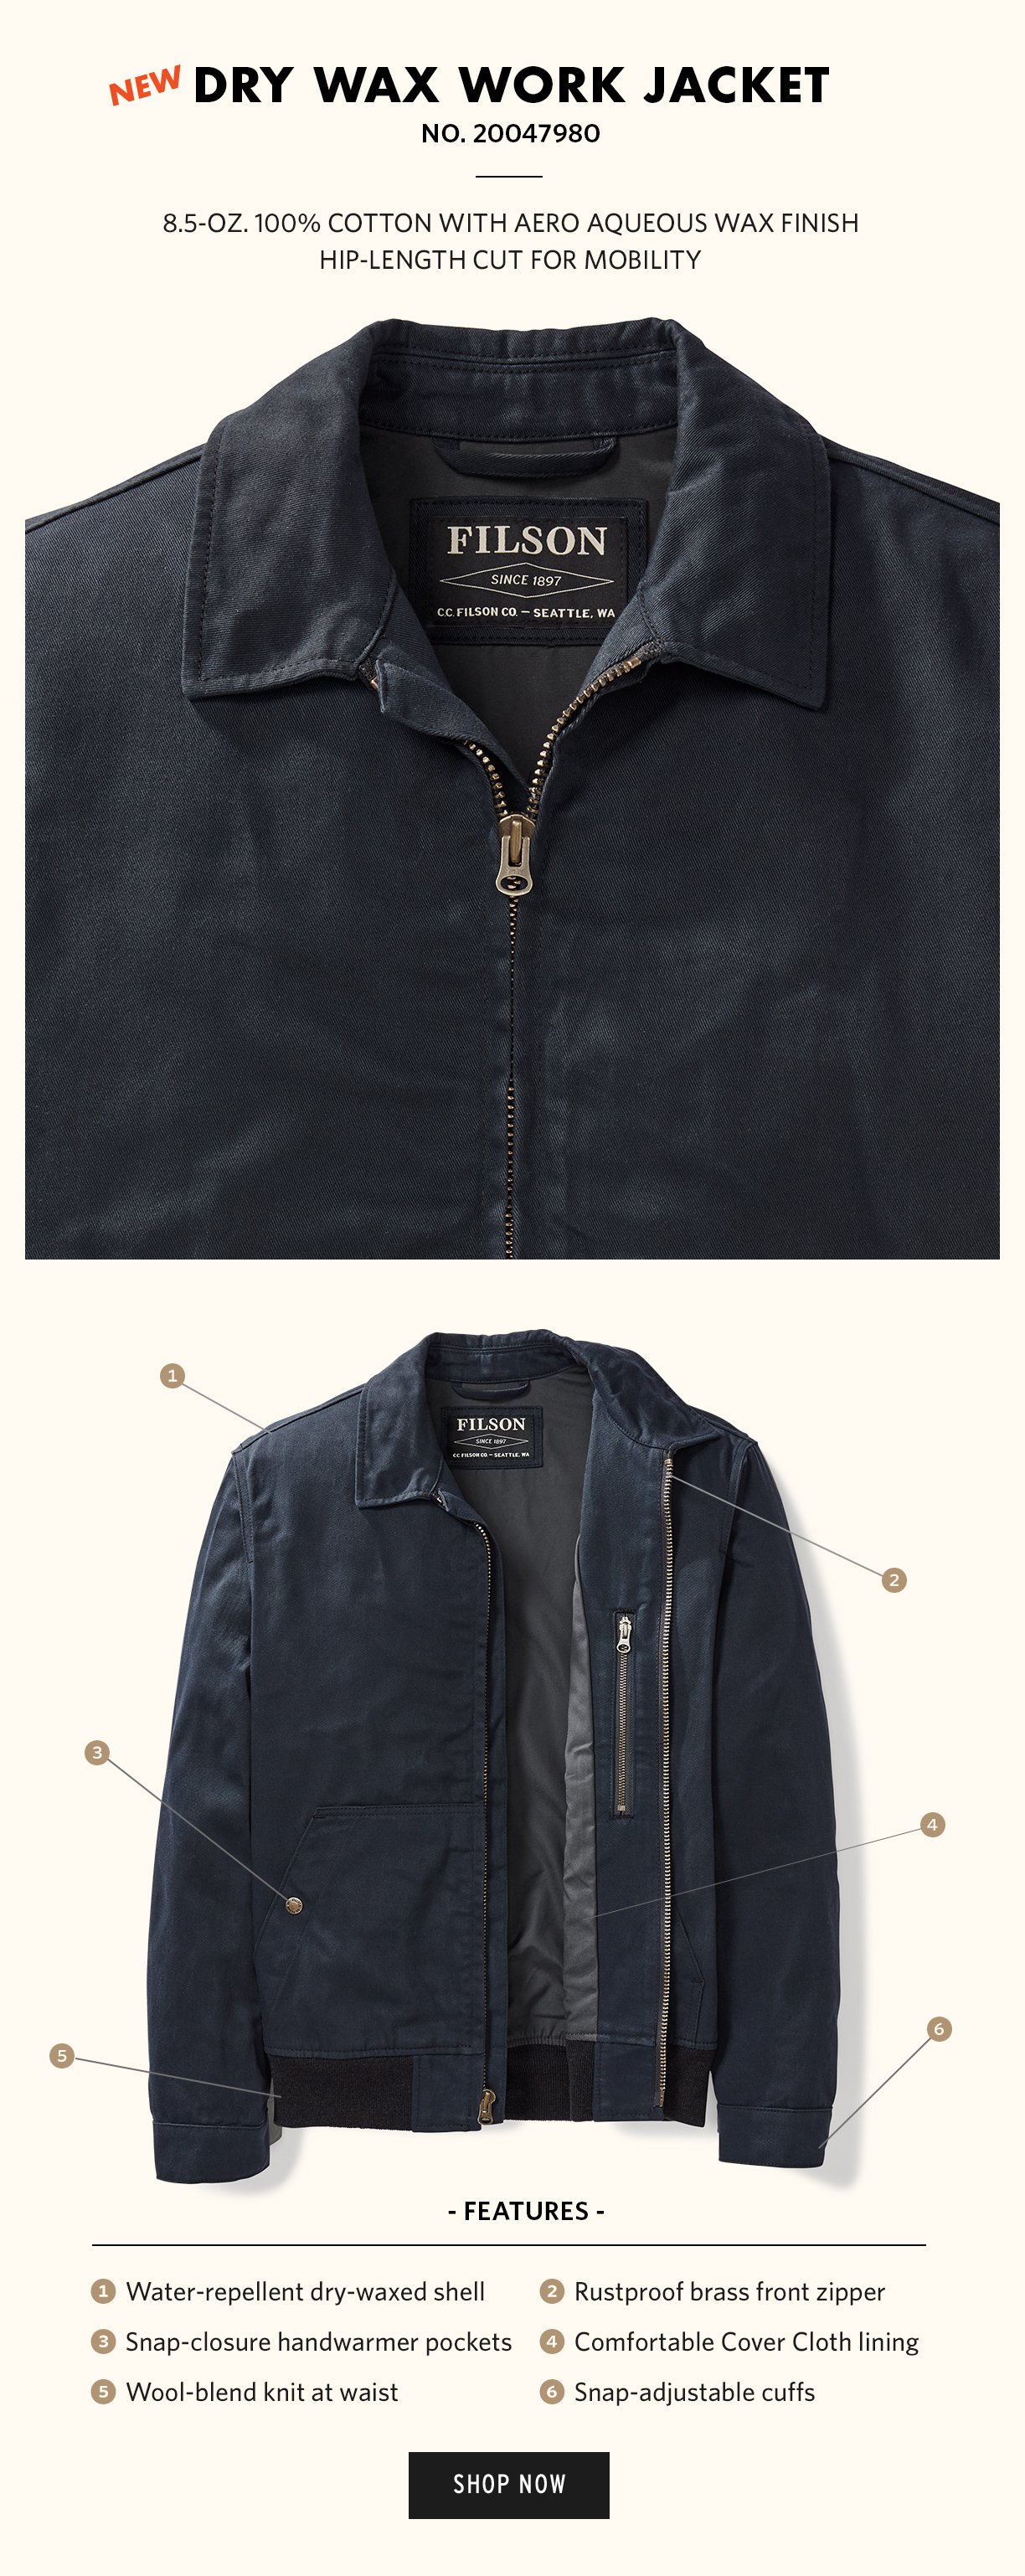 Filson: Just In: The Dry Wax Work Jacket | Milled